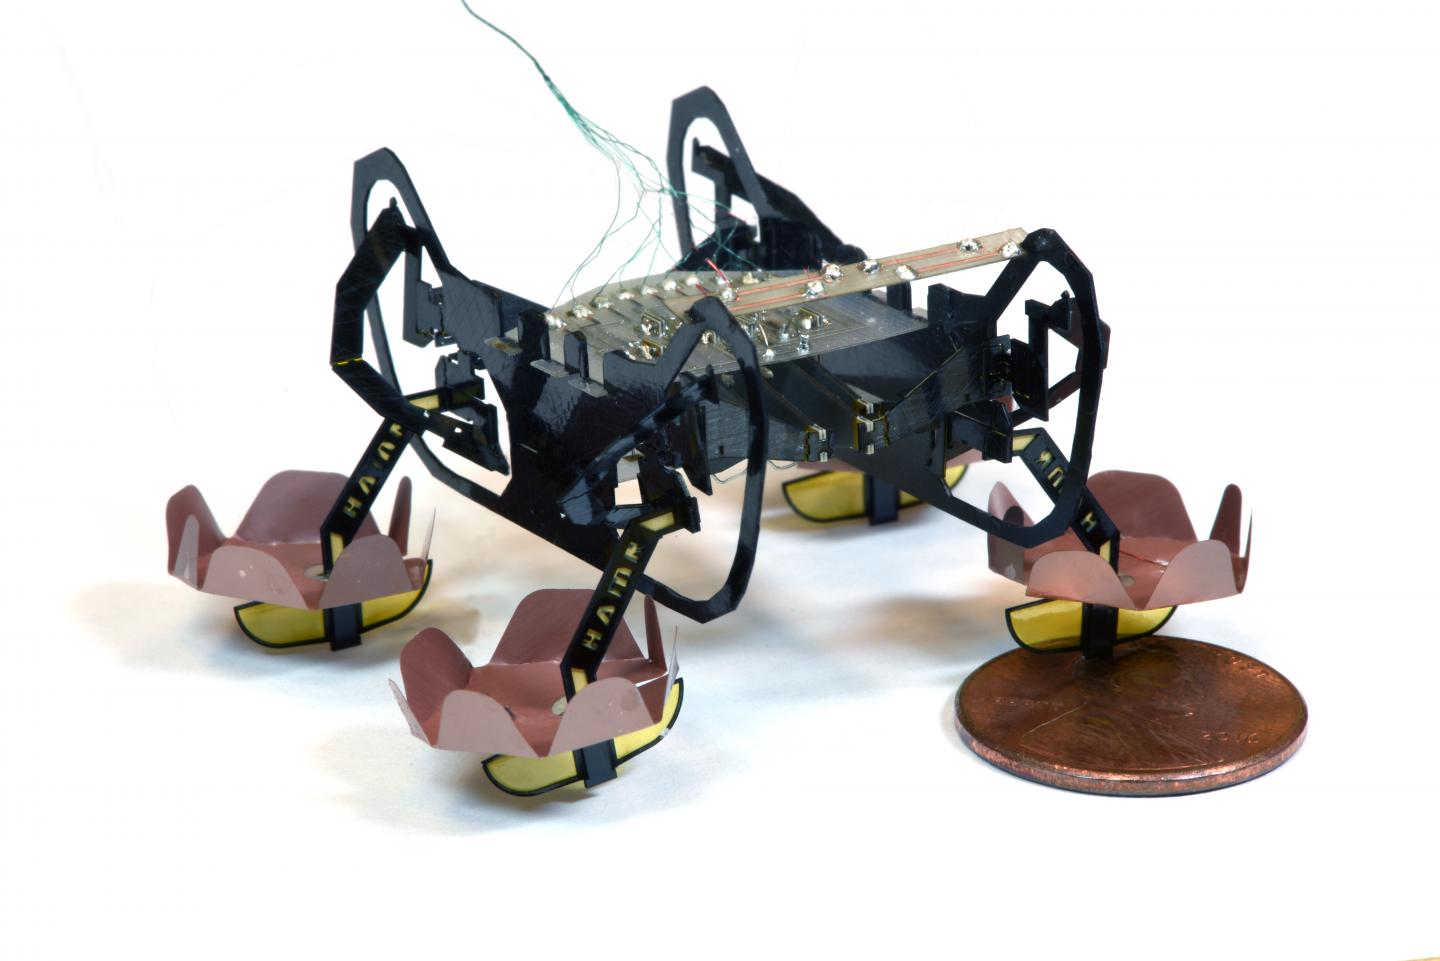 The next generation of Harvard's Ambulatory Microrobot (HAMR) can walk on land, swim on the surface of water, and walk underwater, opening up new environments for this little bot to explore. (Source: Yufeng Chen, Neel Doshi, and Benjamin Goldberg/Harvard University)